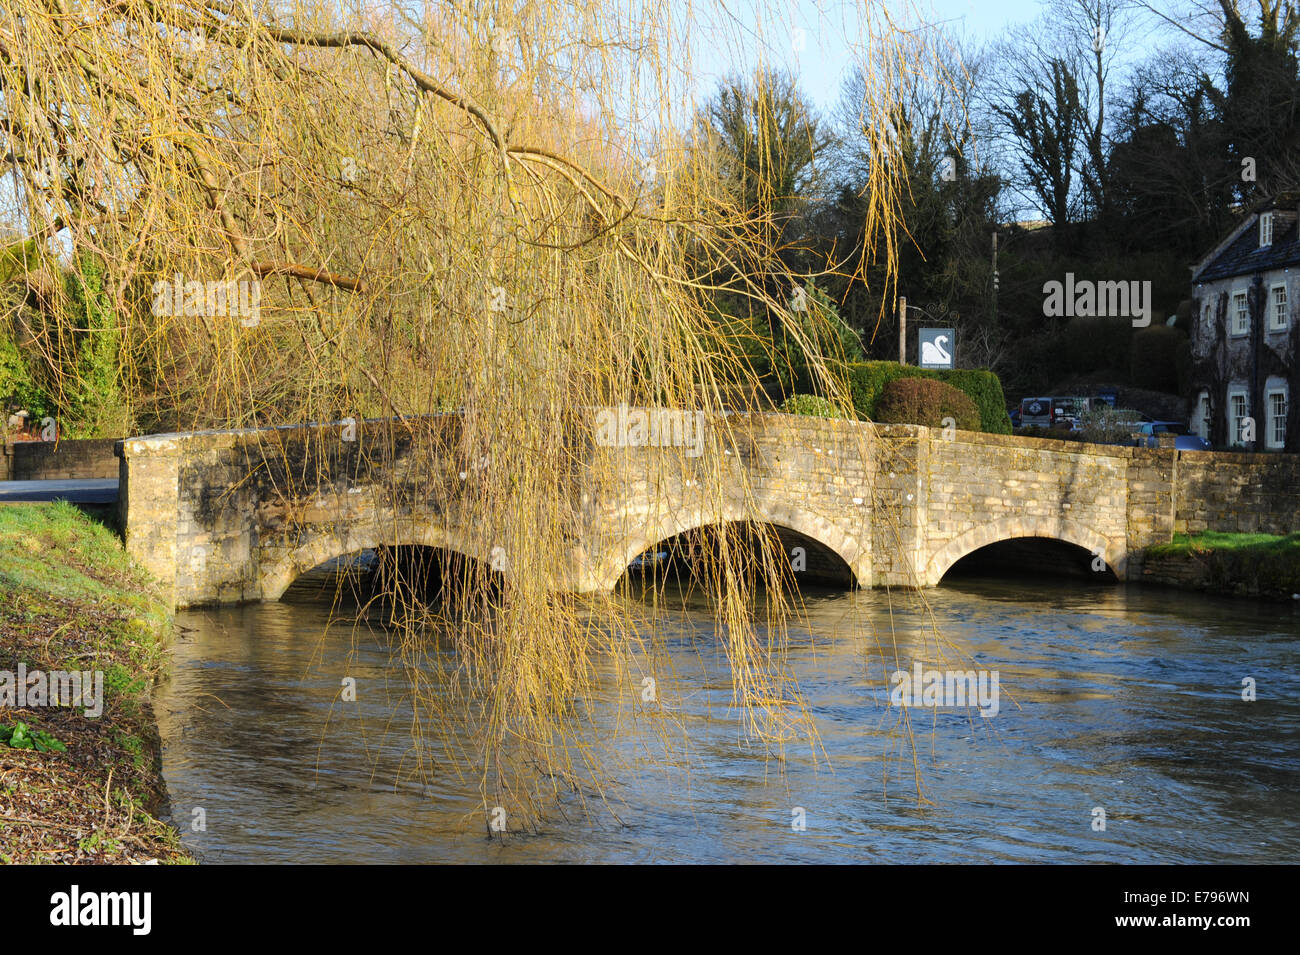 The old stone bridge in the very popular tourist village in the Cotswolds of Bibury, Gloucestershire, England, UK Stock Photo